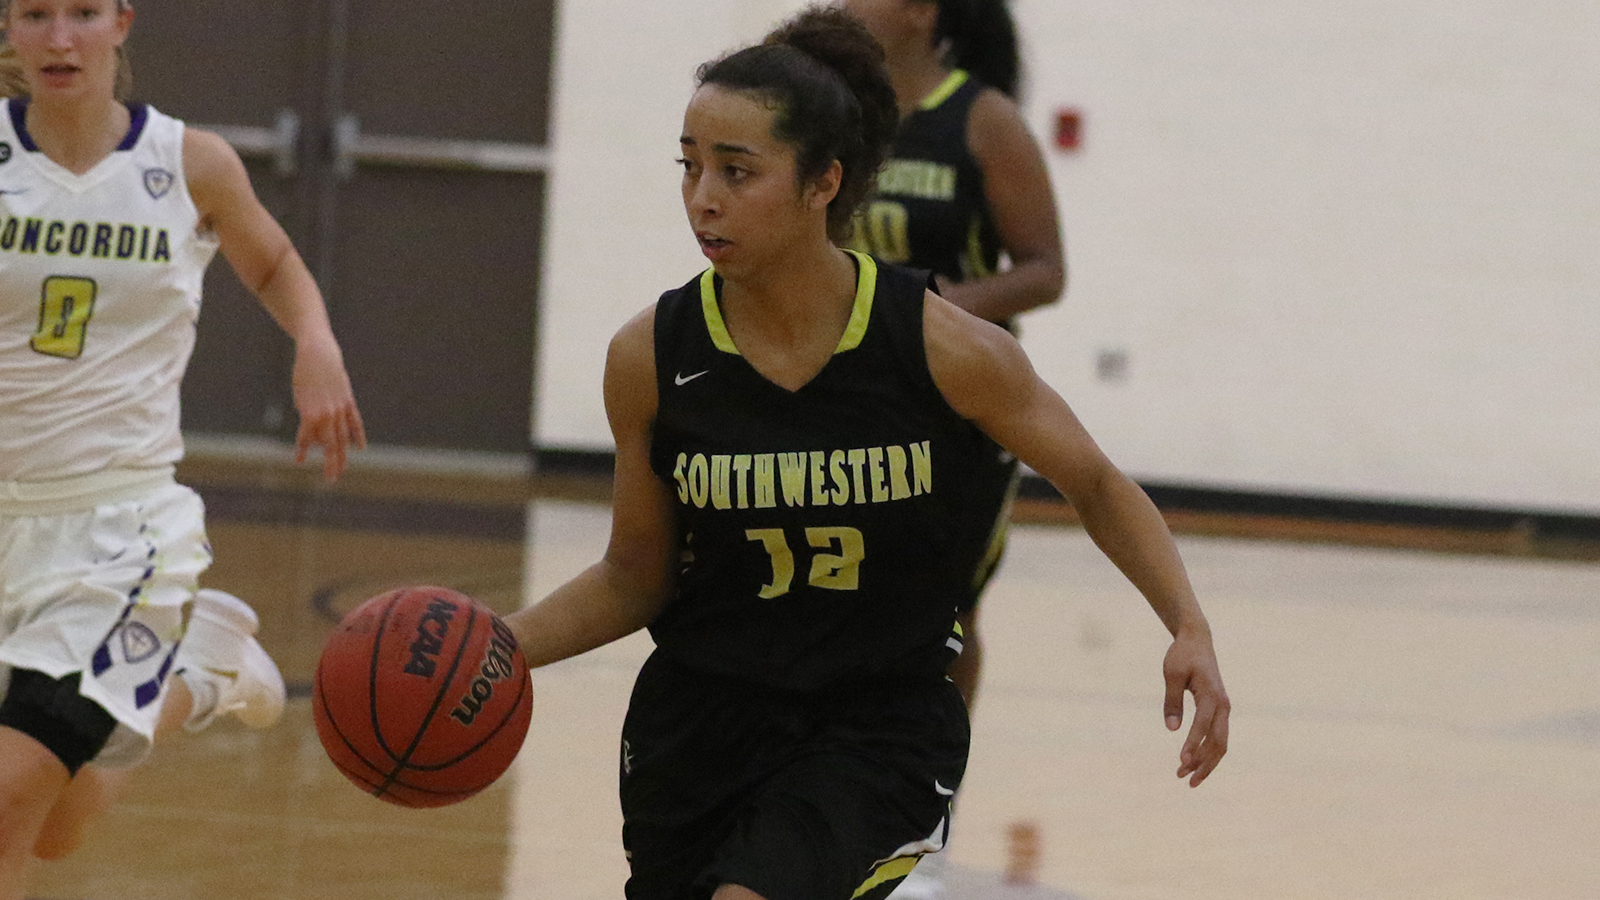 Pirates Storm Back with Big Second Half to Knock Off Concordia Texas